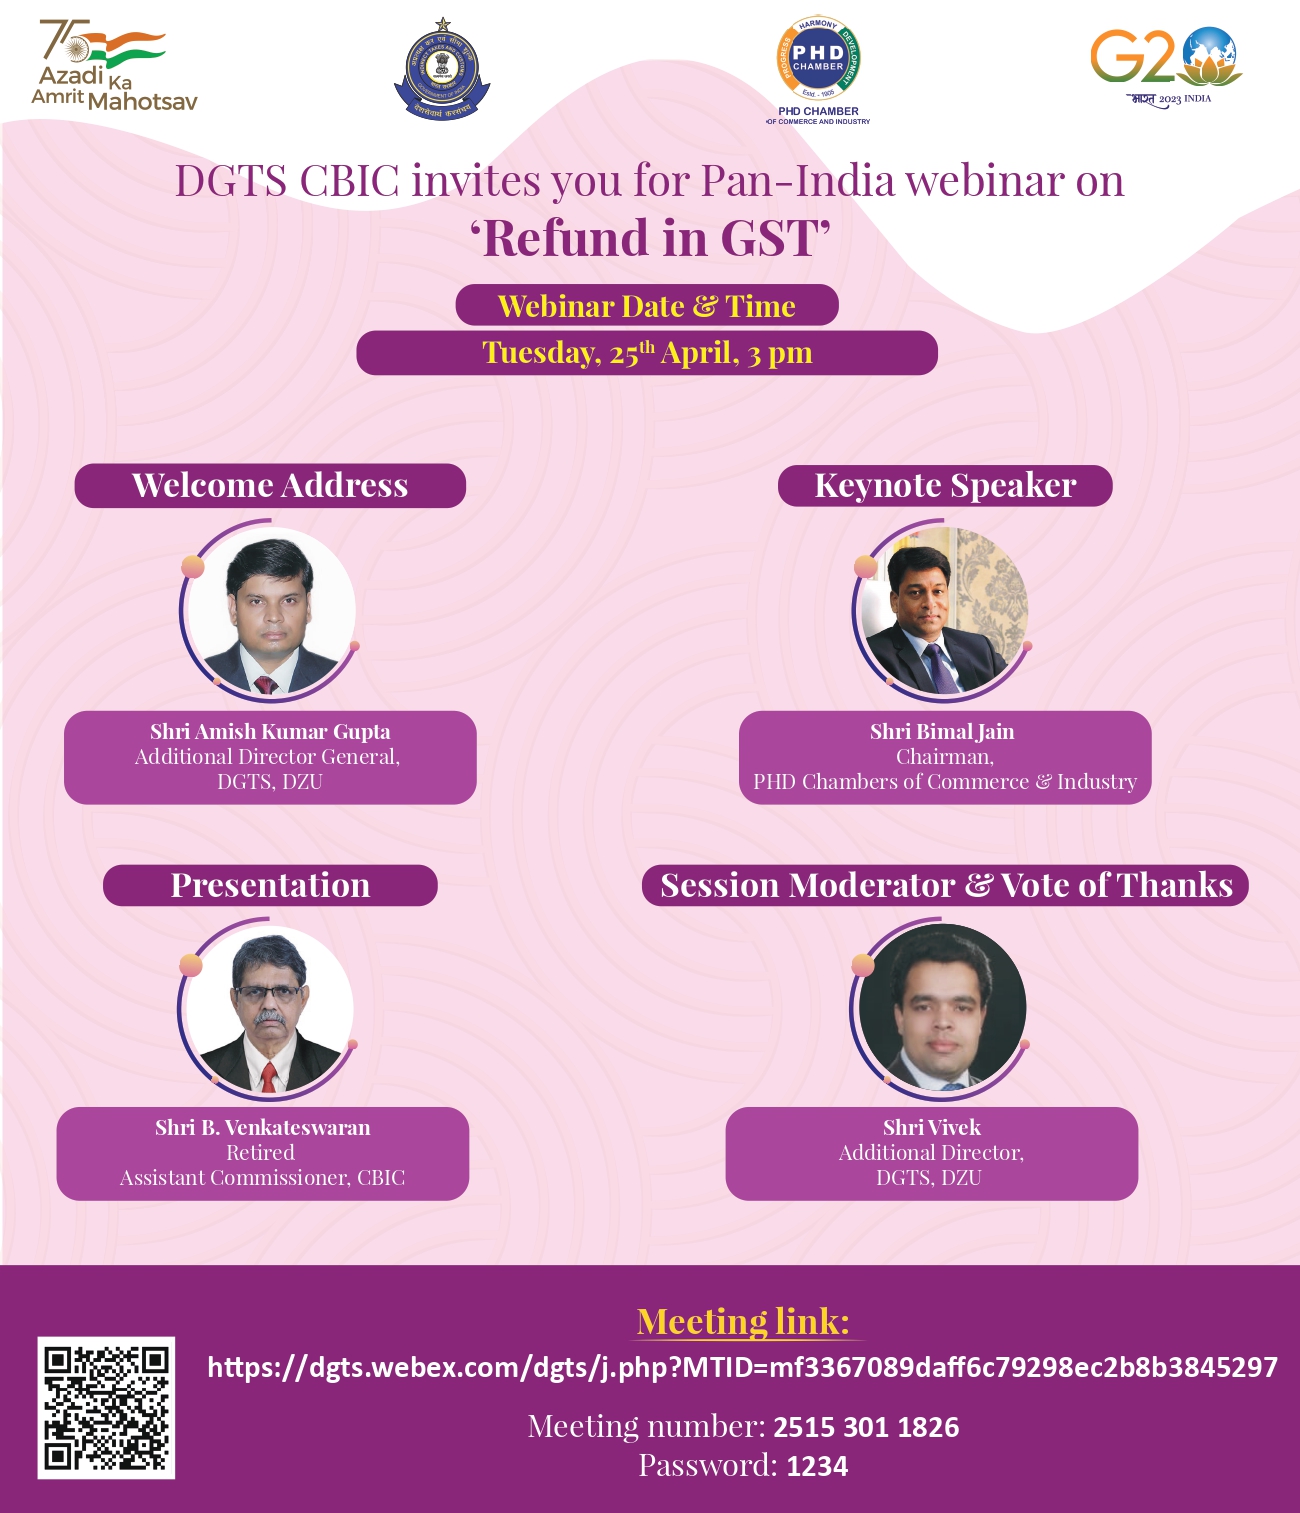 Dgts DZU on X: DGTS CBIC invites you for Pan-India webinar on Refund in  GST on 25.04.2023 at 1500 hrs Meeting link:- t.coiJ3ym7MsrJ  Meeting number 2515 301 1826 Password 1234 t.co5W1bVYFiKs 